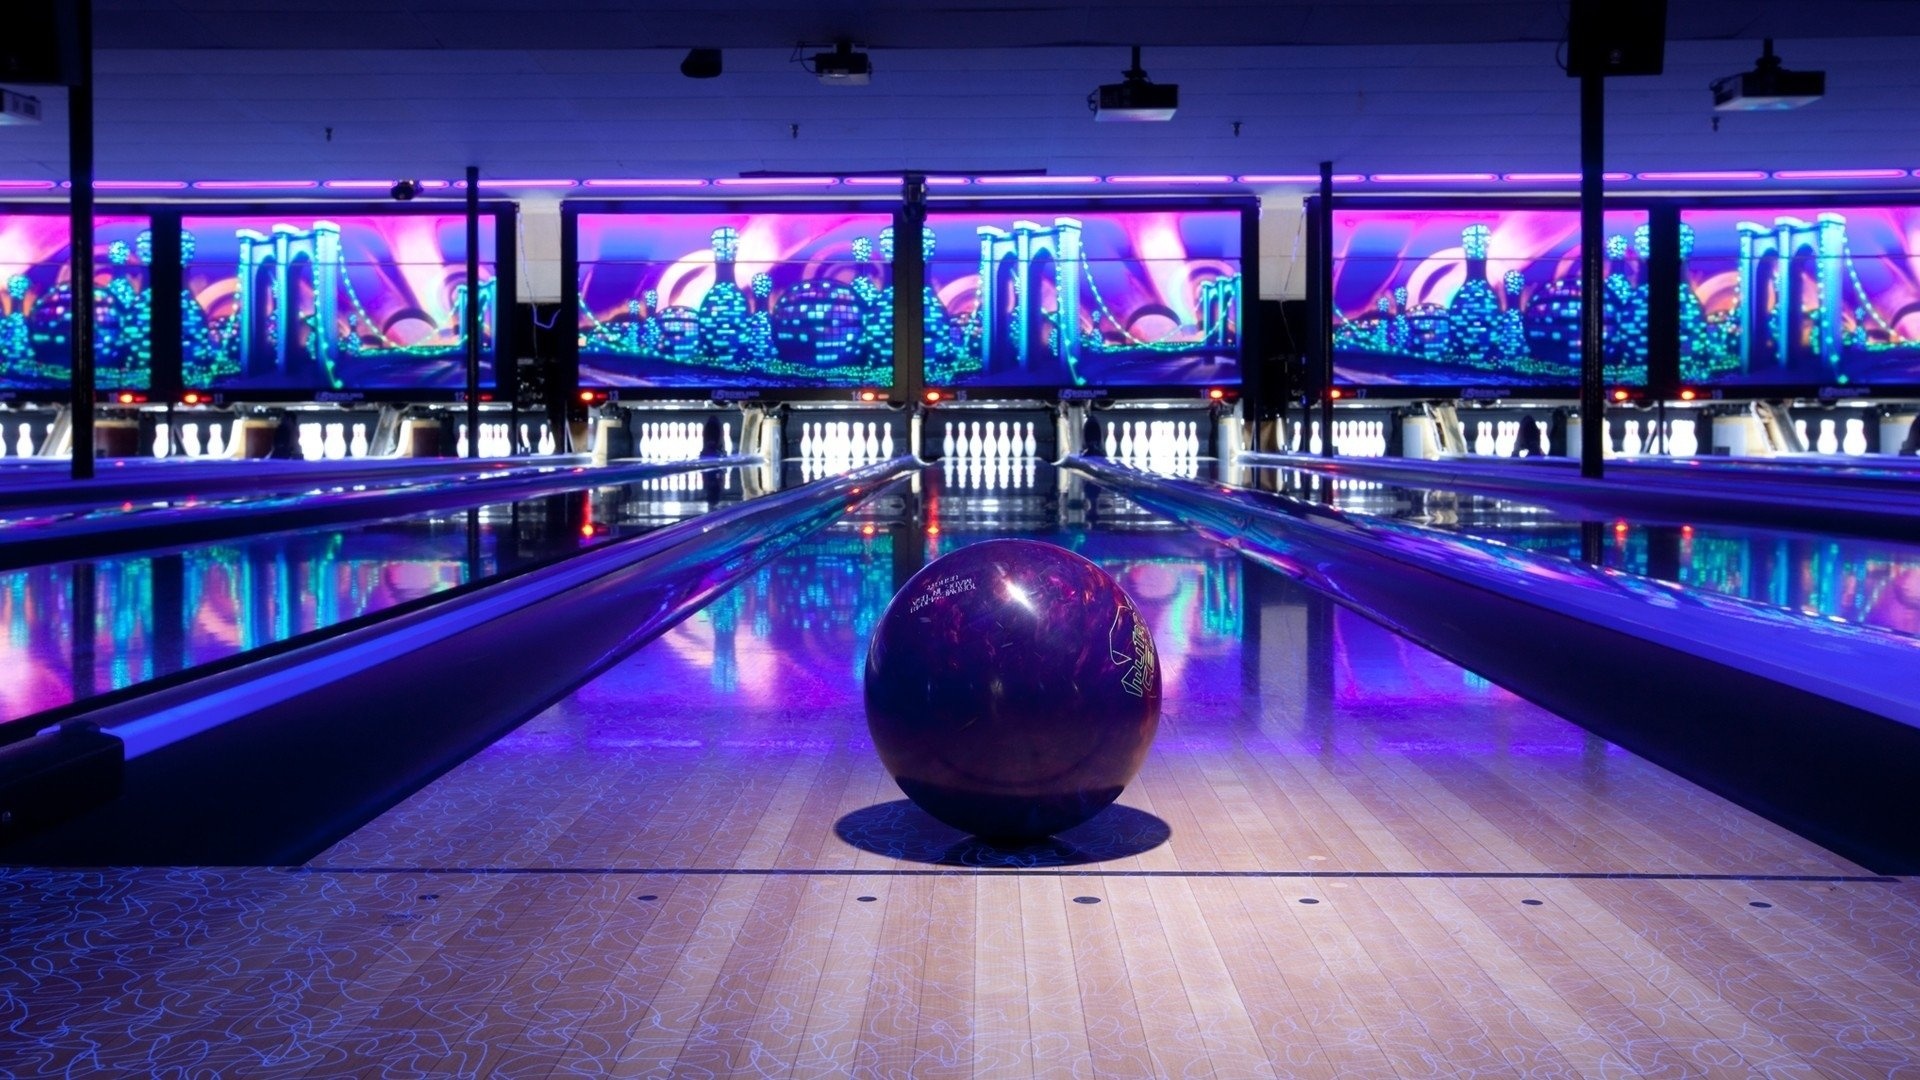 Bowling: Bowler, A game played by rolling a ball down a wooden alley in order to knock down a group of ten pins. 1920x1080 Full HD Wallpaper.